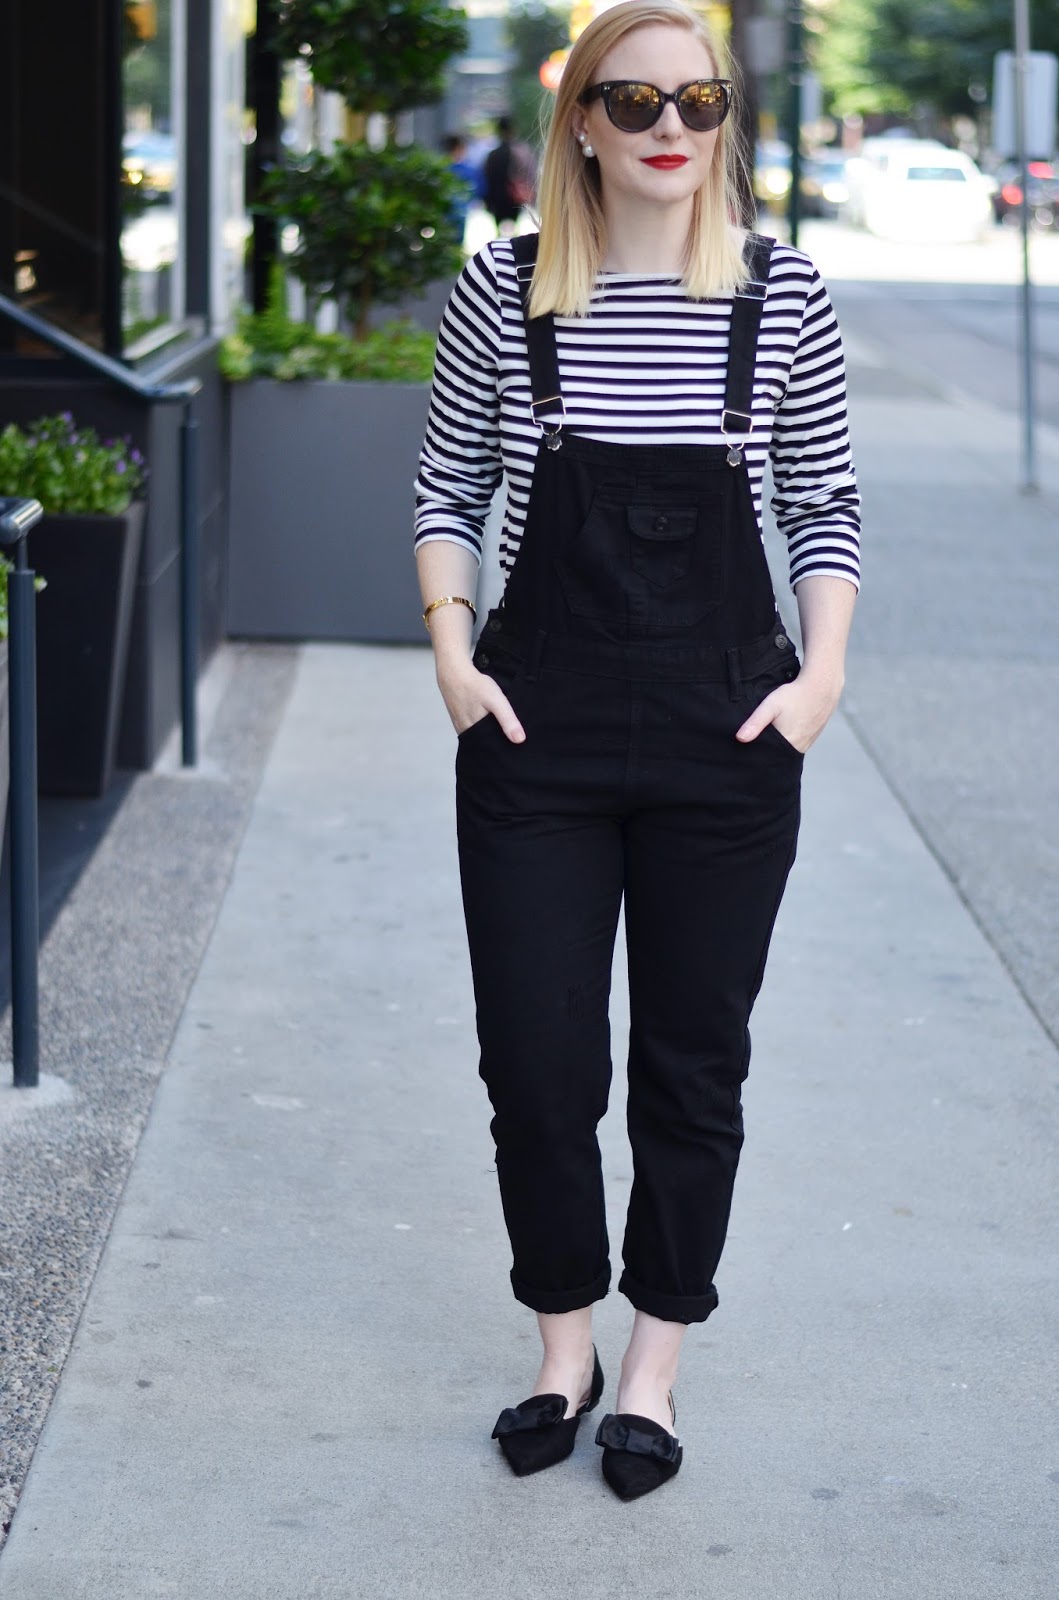 Vancouver Vogue: How to Wear Overalls and Look Chic